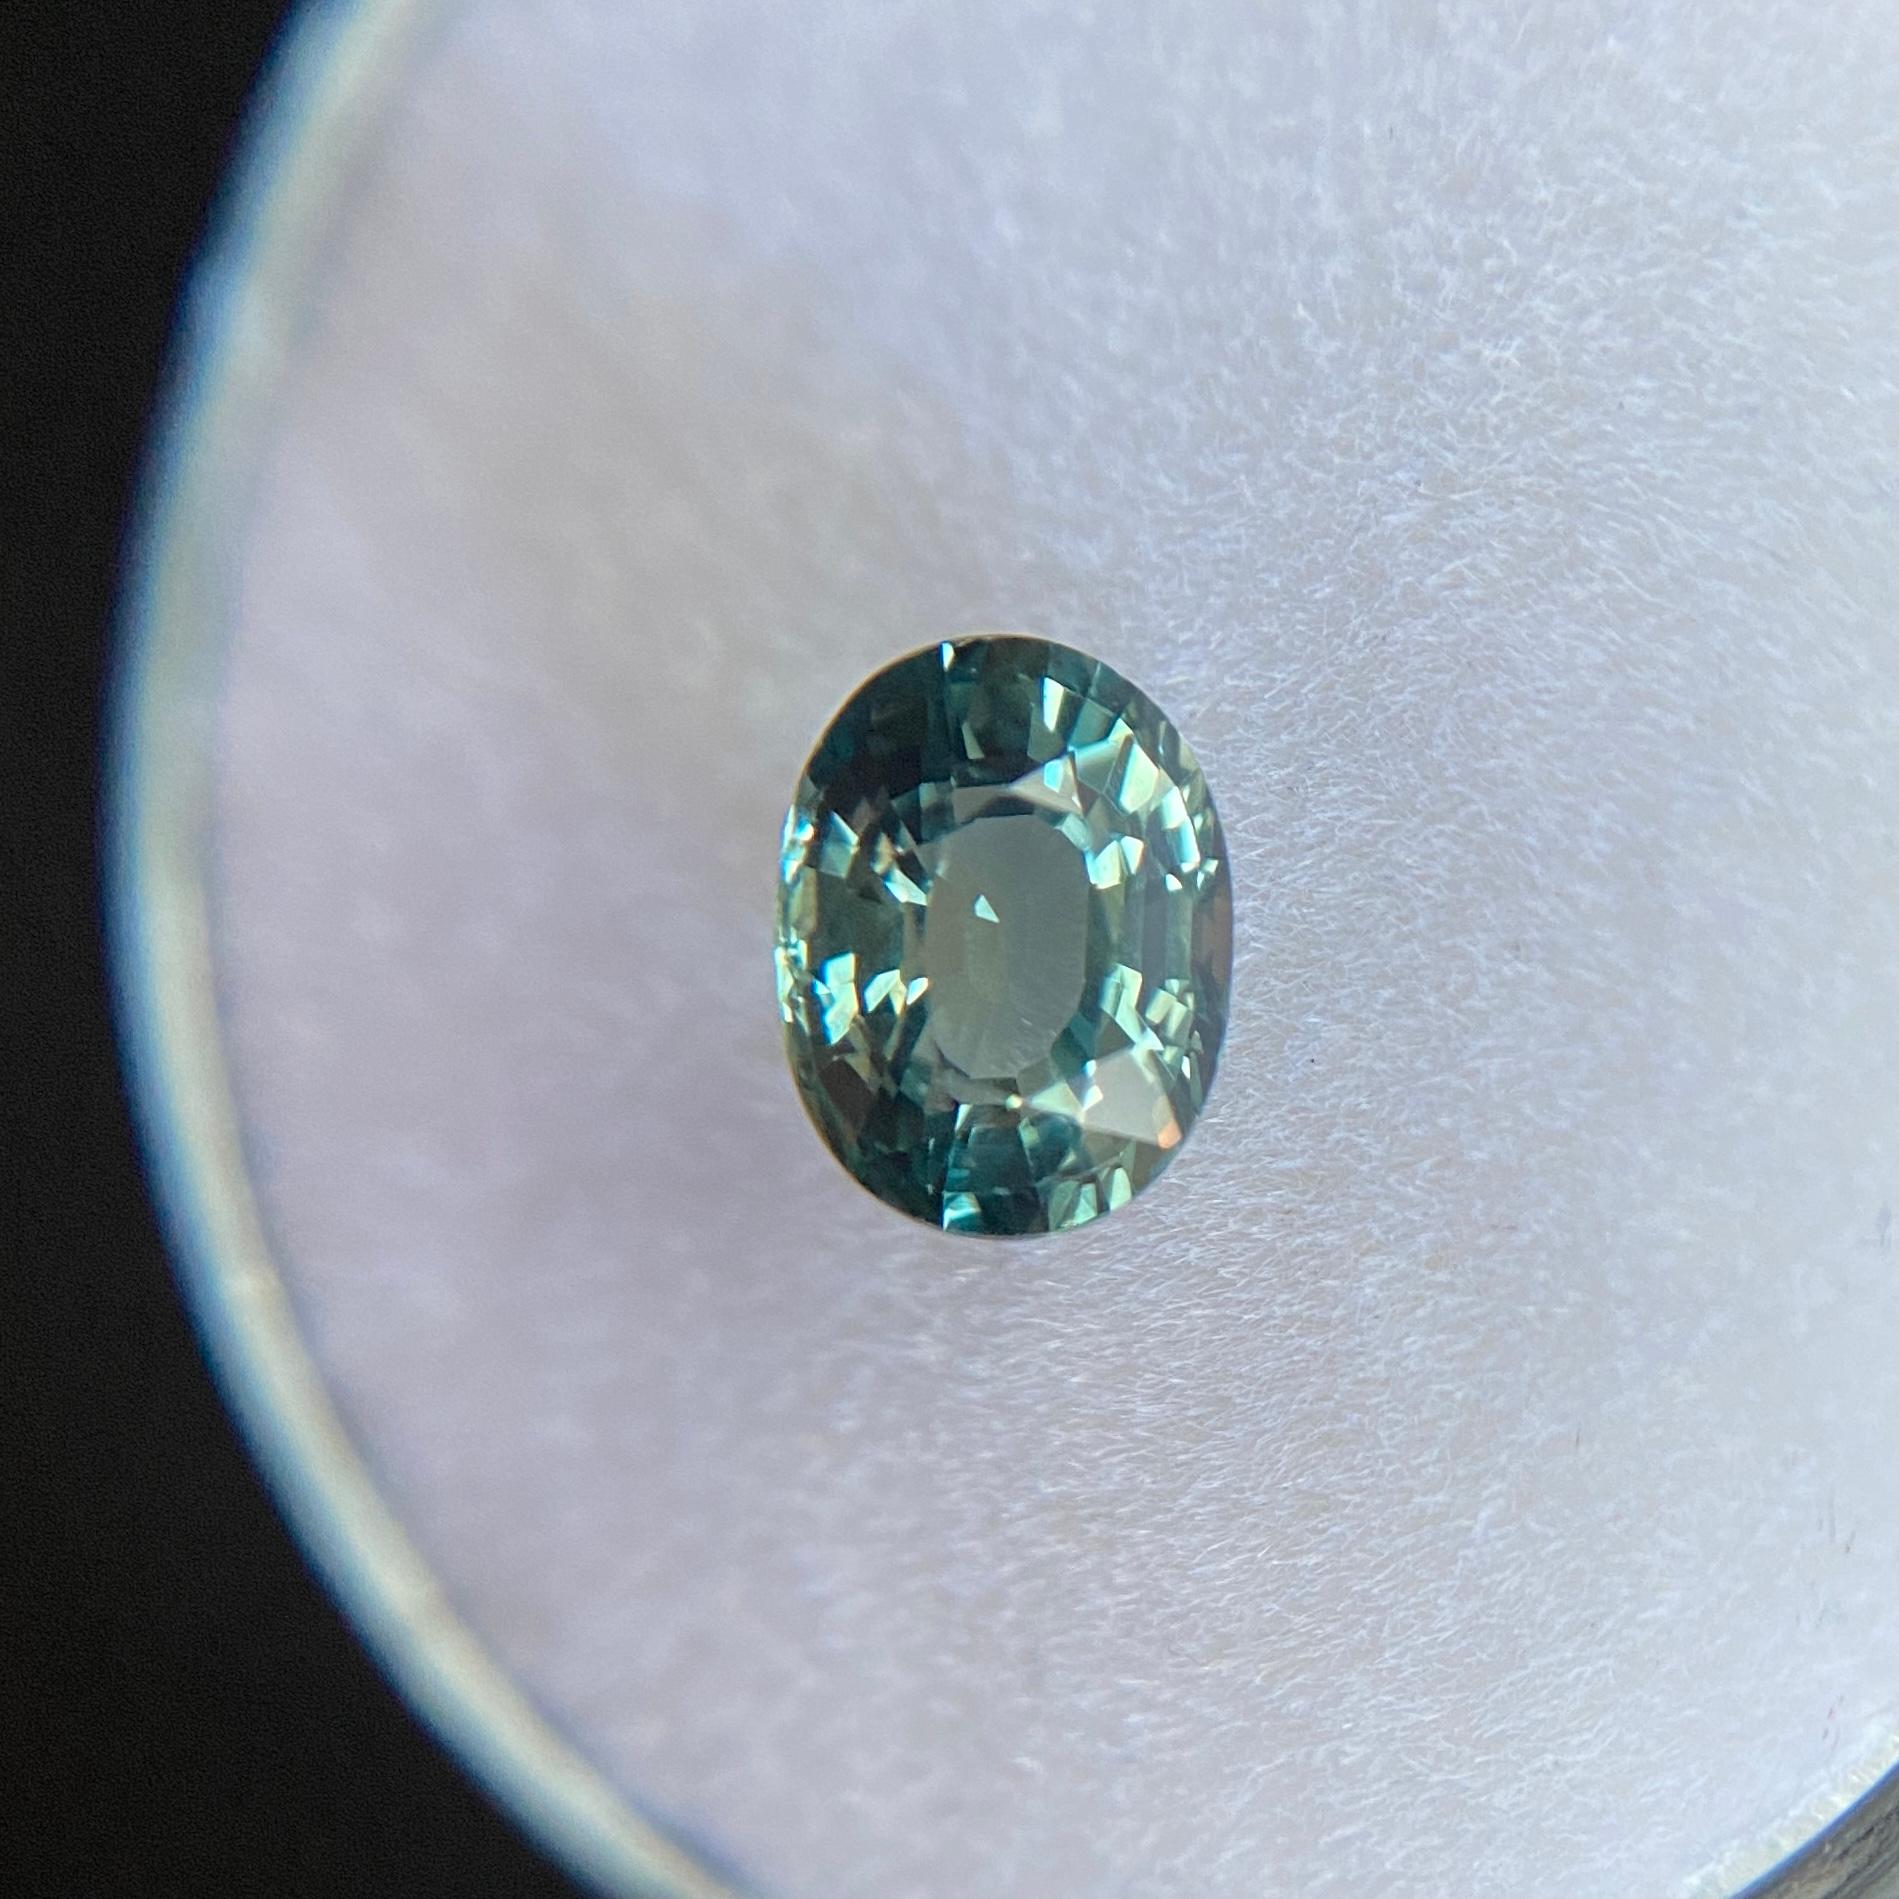 GIA Certified Fine Vivid Green Blue Untreated Sapphire Gemstone.

Fully certified by GIA confirming stone as natural and untreated. Very rare for natural sapphires.

1.03 Carat with excellent clarity, a very clean stone. It also has an excellent